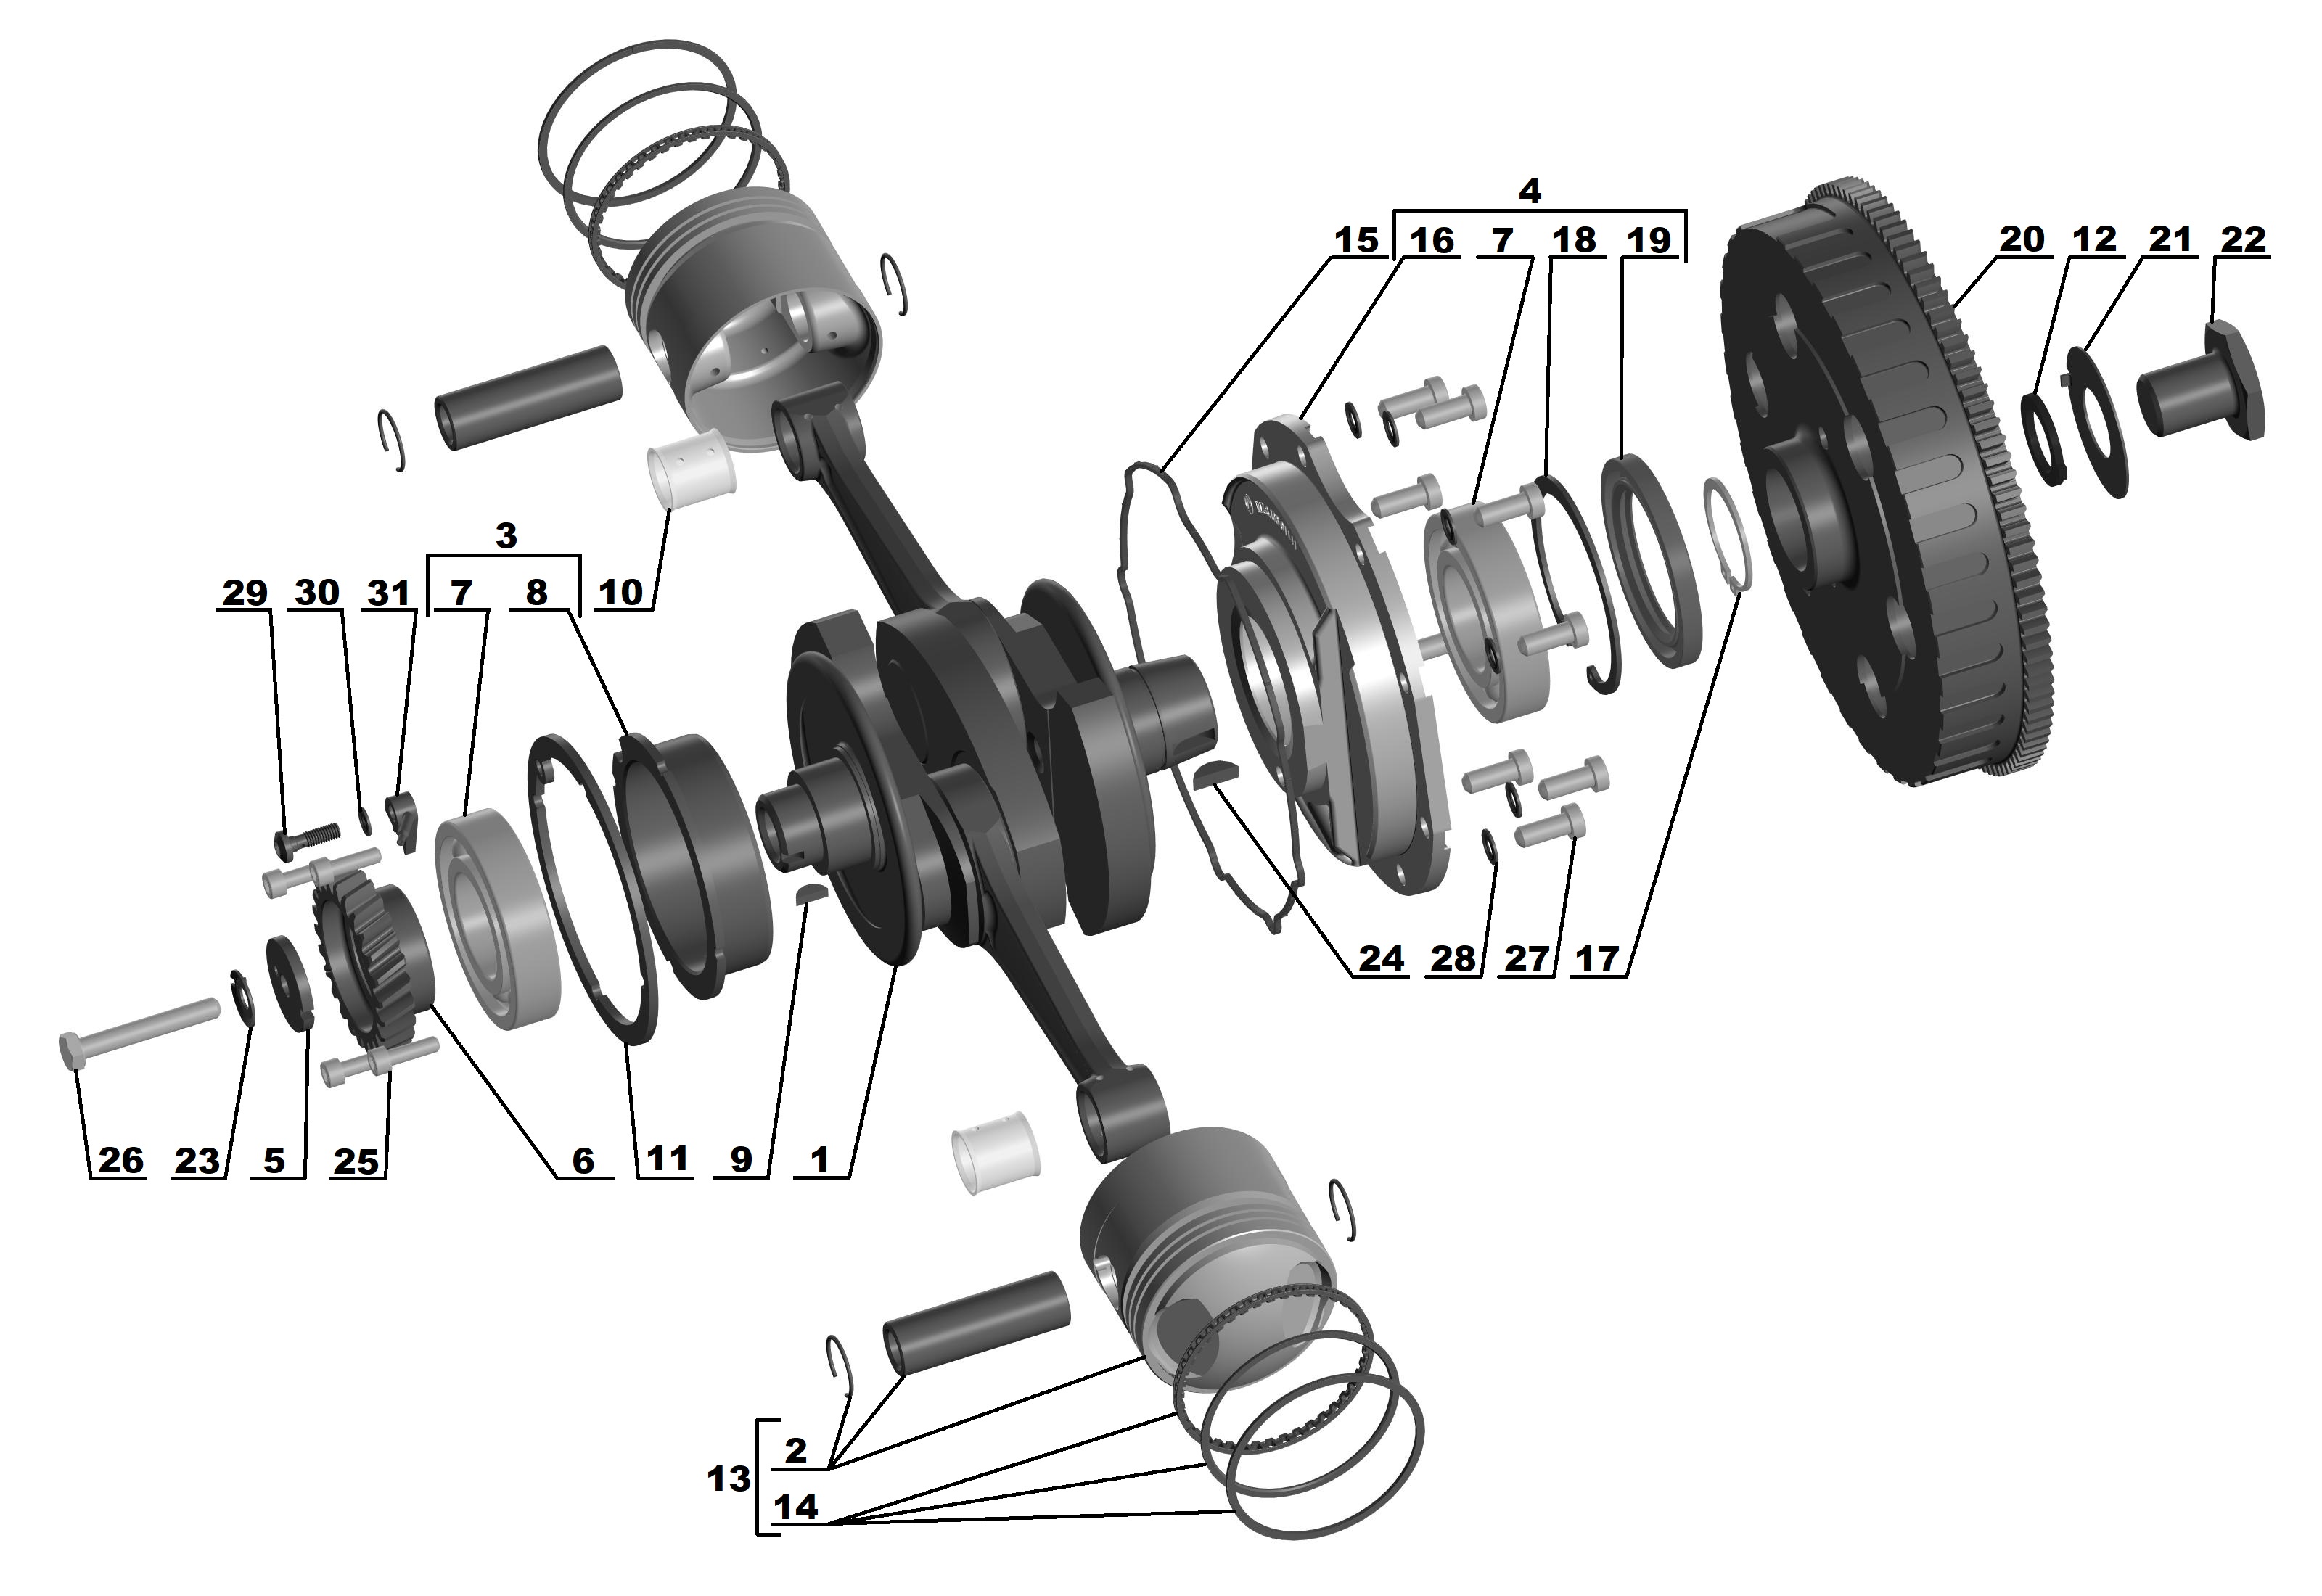 Crankshaft with conrods and pistons